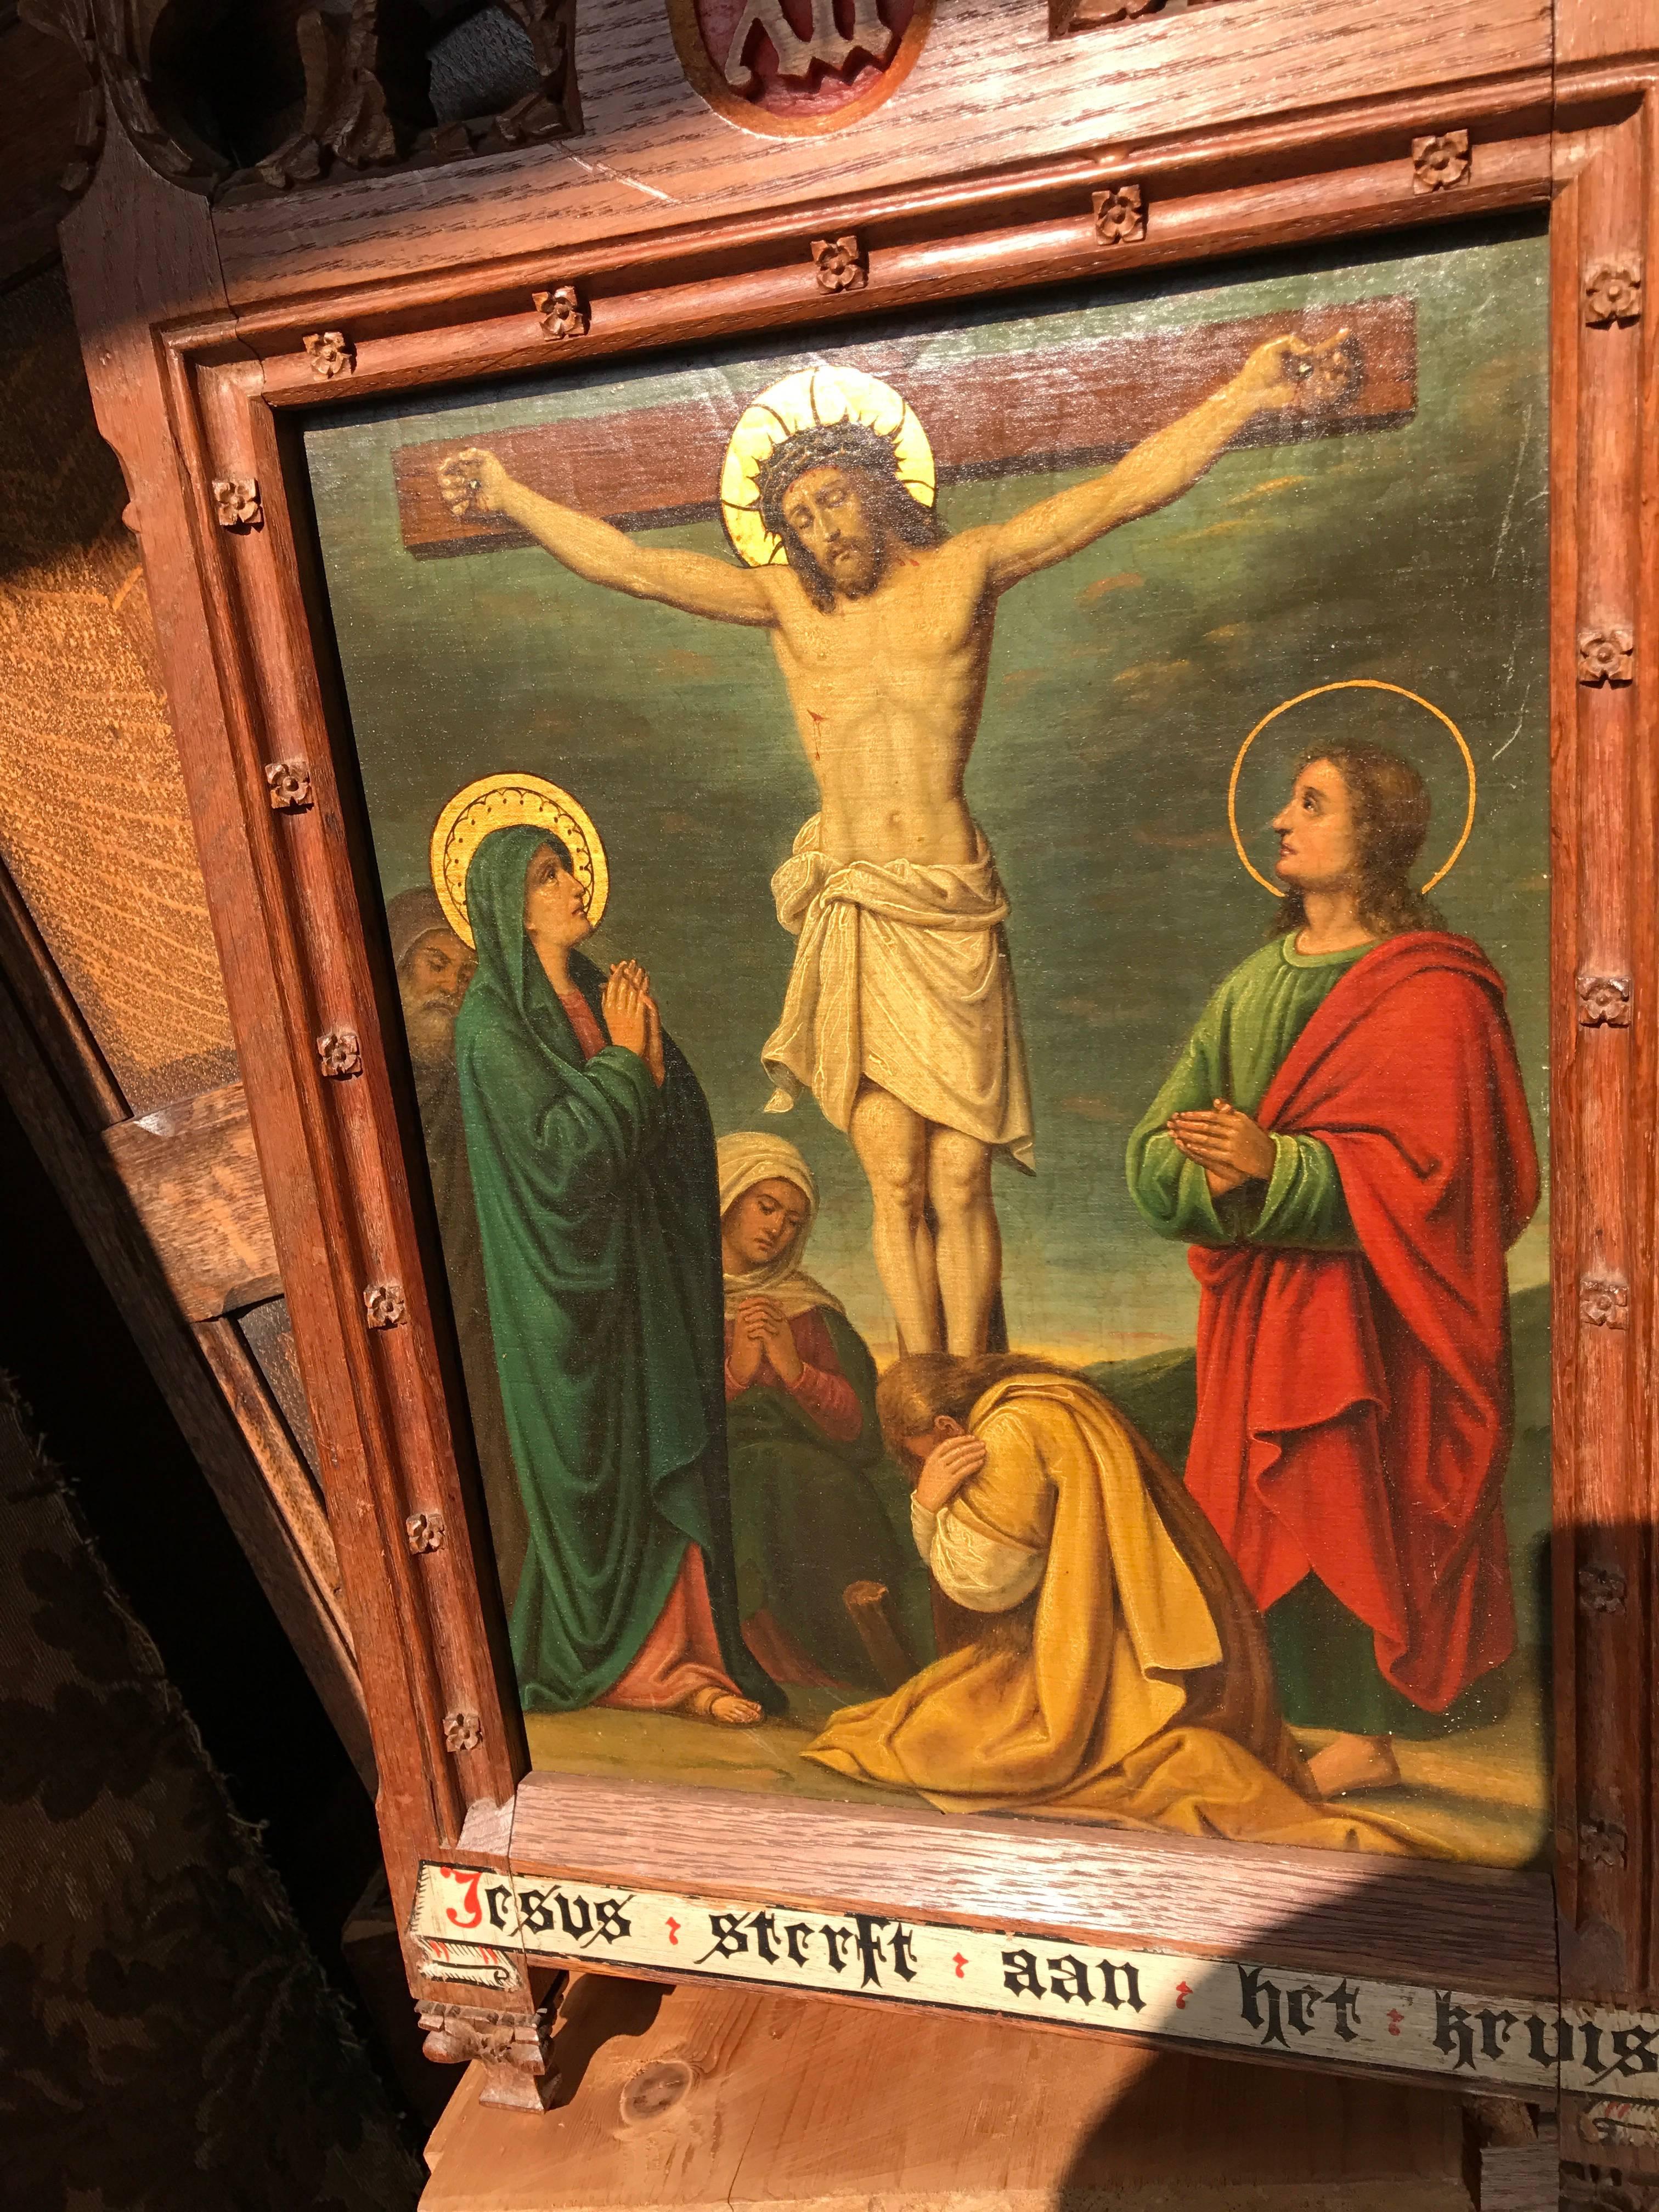 Another stunning religious work of fine art.

This polychrome painting on metal depicts Jesus, hanging on the cross with Mary, John and Mary Magdalene to support him.

This painting is framed in a beautifully carved, Gothic Revival oak frame. The